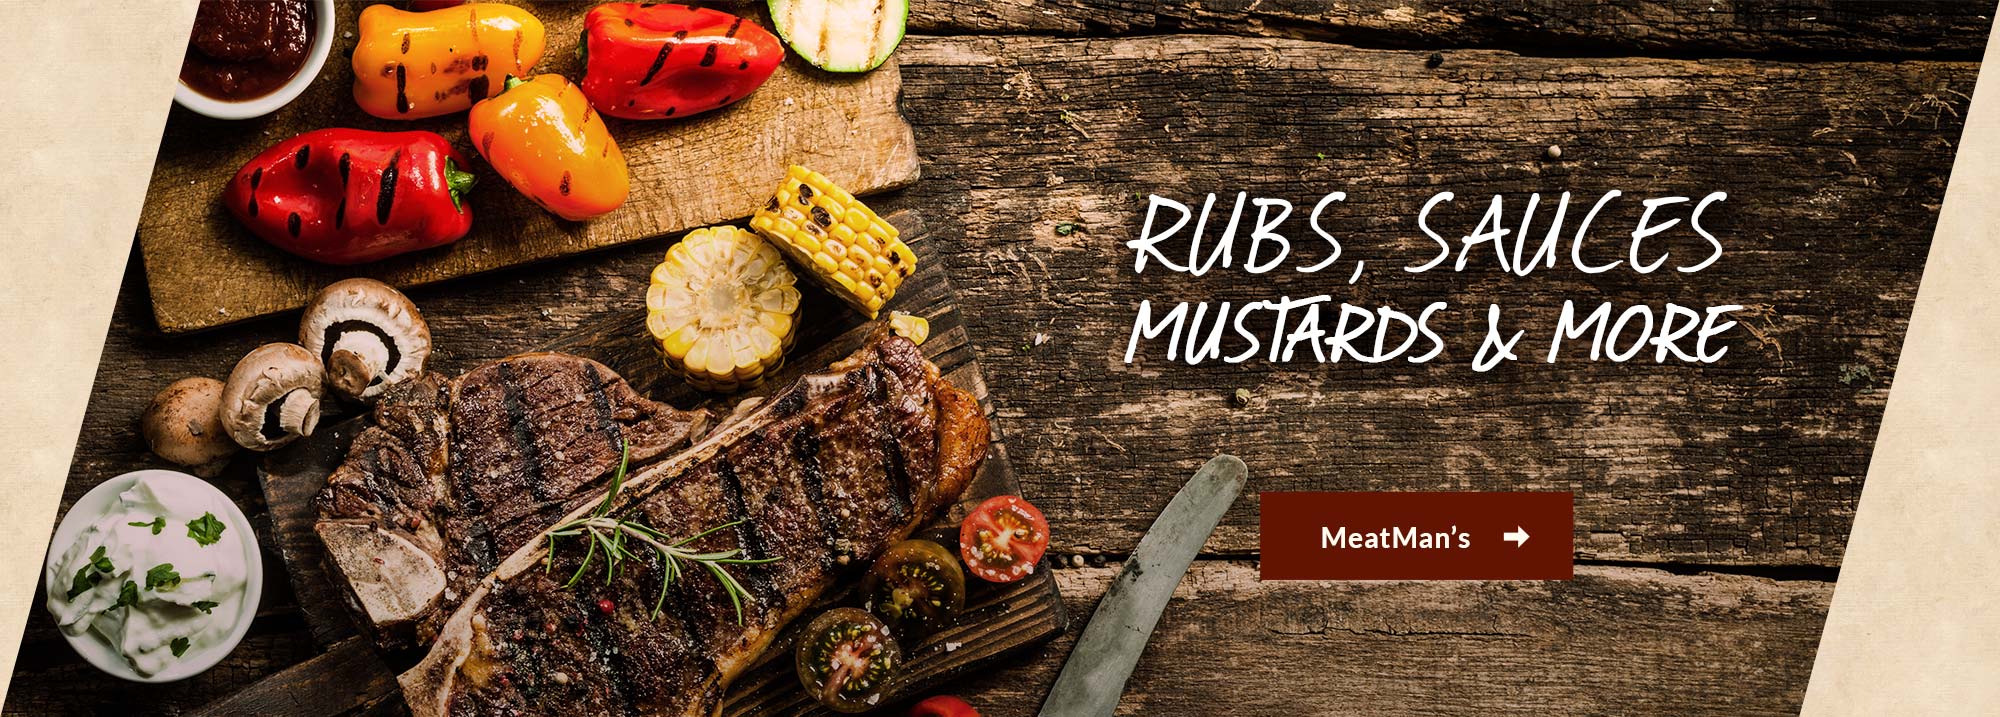 Copy of MeatMan's Rubs, Marinades, Mustards and More